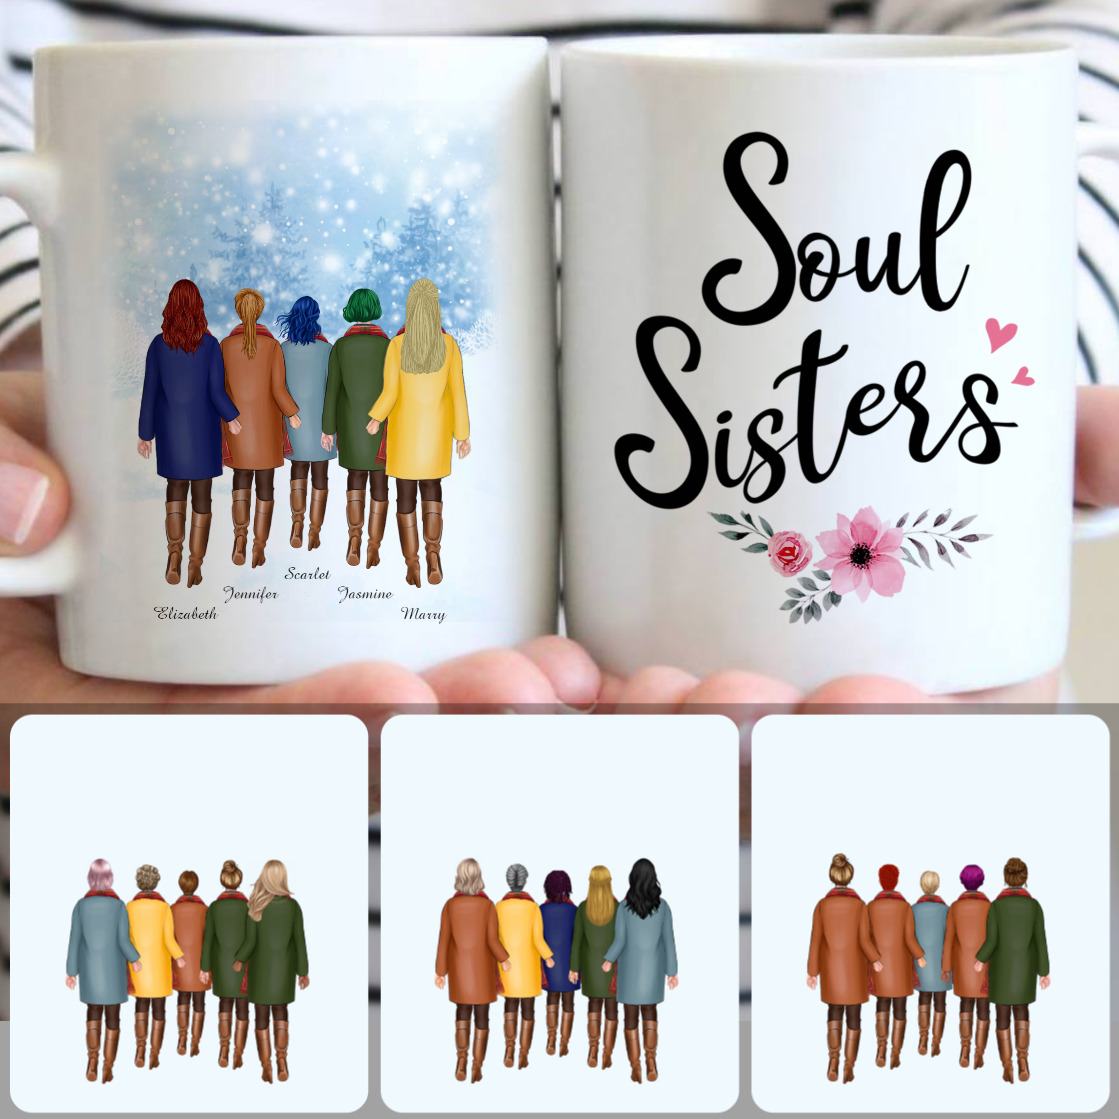 Personalized Mug, Unique Birthday Gifts, 5 Soul Sisters Customized Coffee Mug With Names